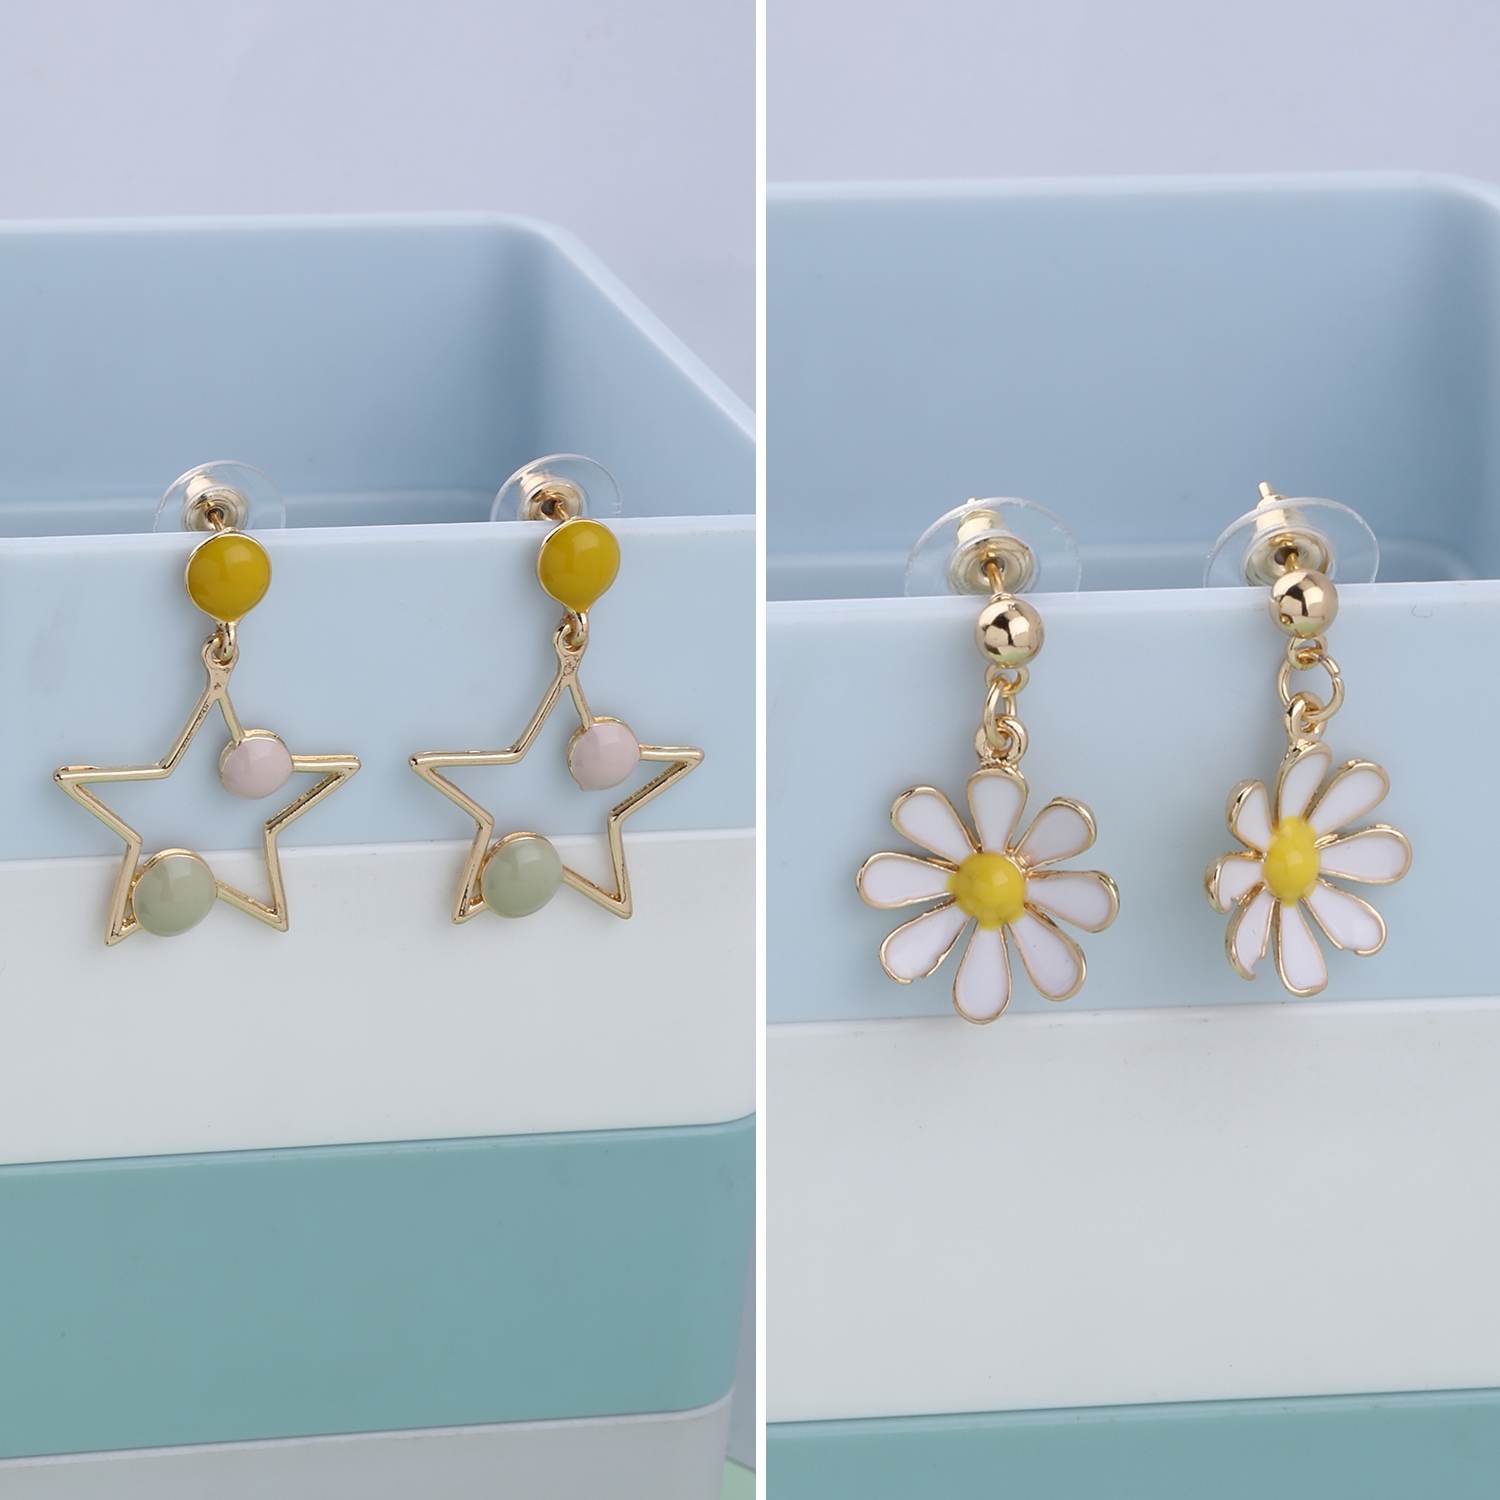 SILVER SHINE | Party Wear Star and Flower Design Fashion Earrings For Women and Girls 2 Pairs 